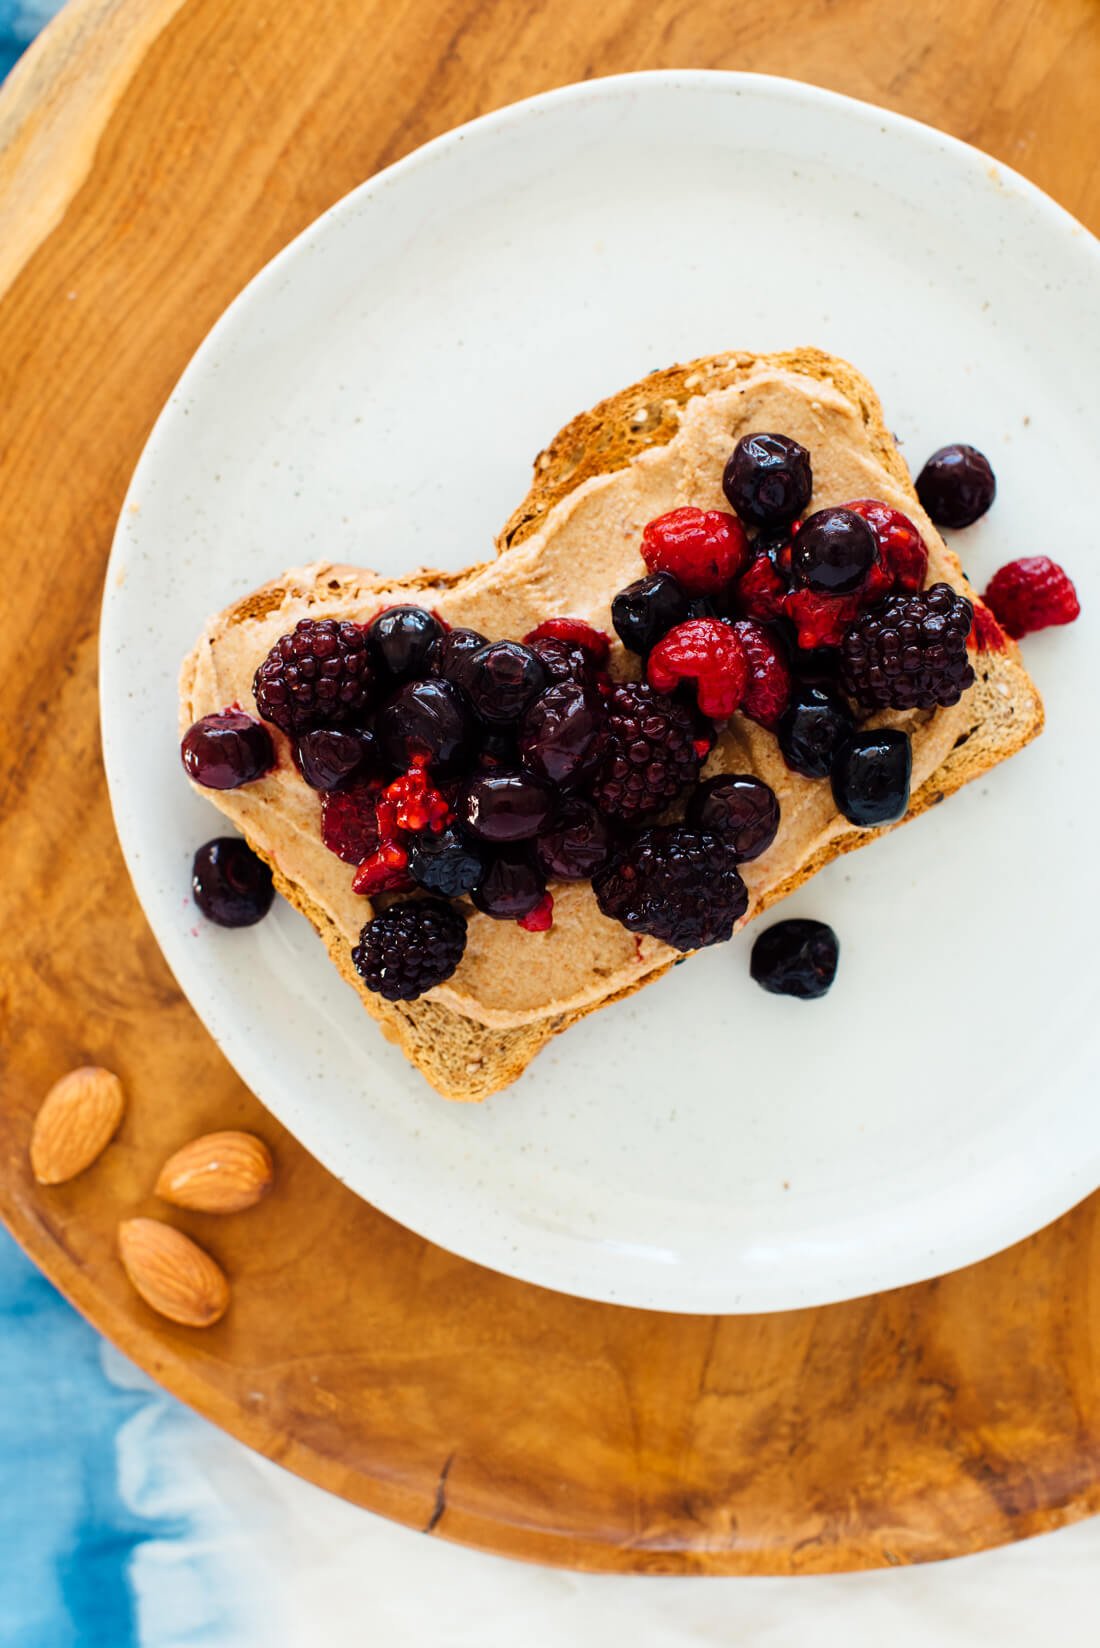 homemade almond butter with berries